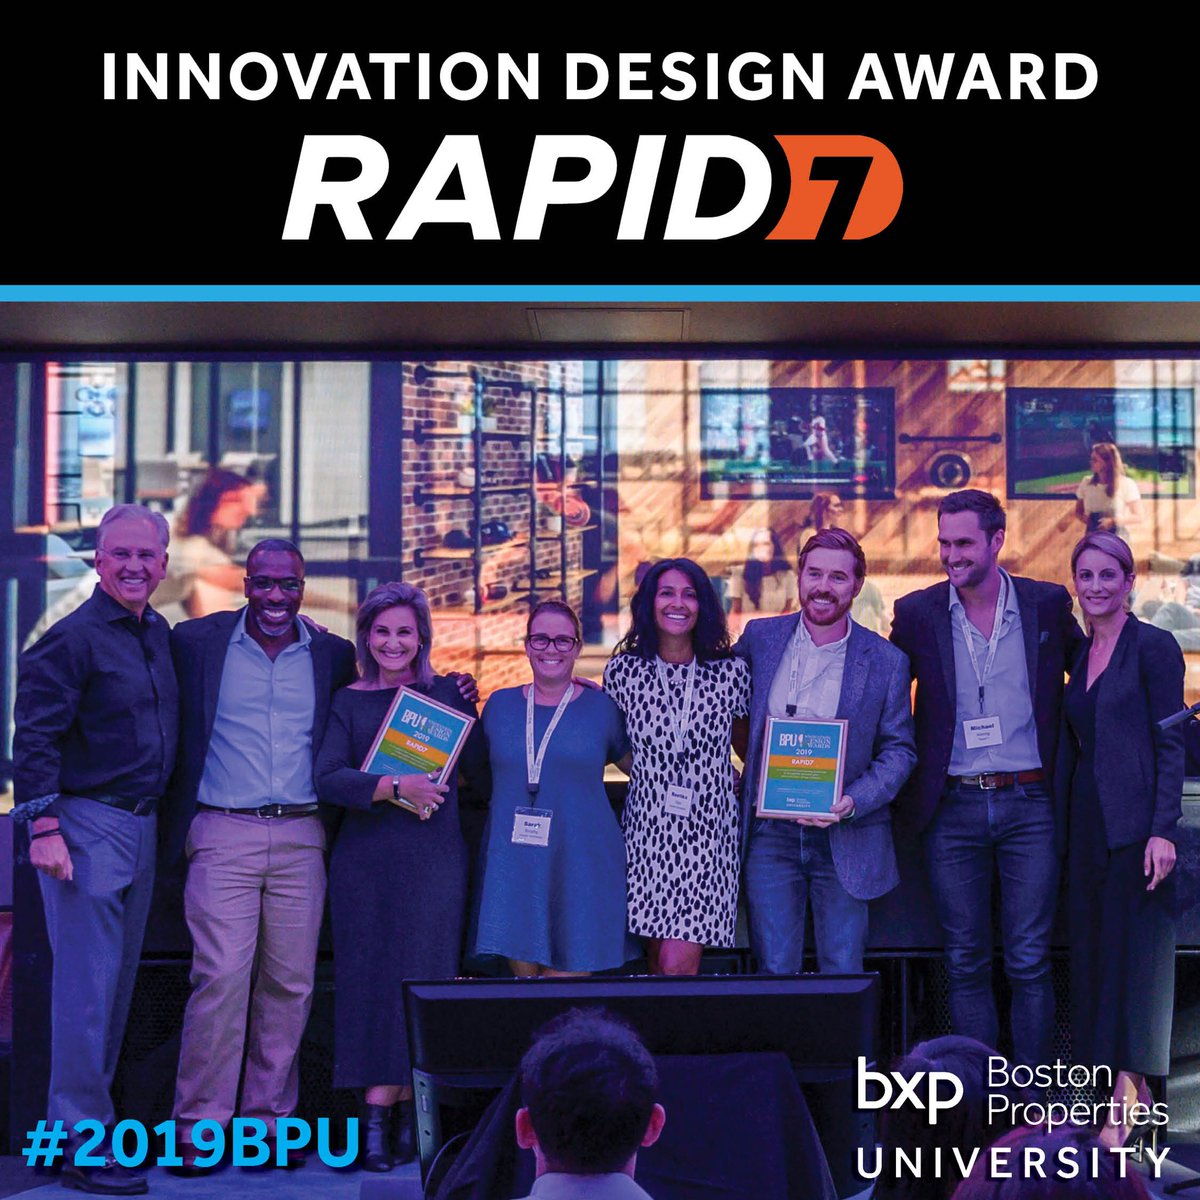 Congratulations ⁦@rapid7⁩ Winner  of #innovationdesign #award ⁦@bxpboston⁩ #university ⁦@TheHubBos⁩ Incredible #spaceandplace ⁦@T3Advisors⁩ ⁦@IA_architects⁩